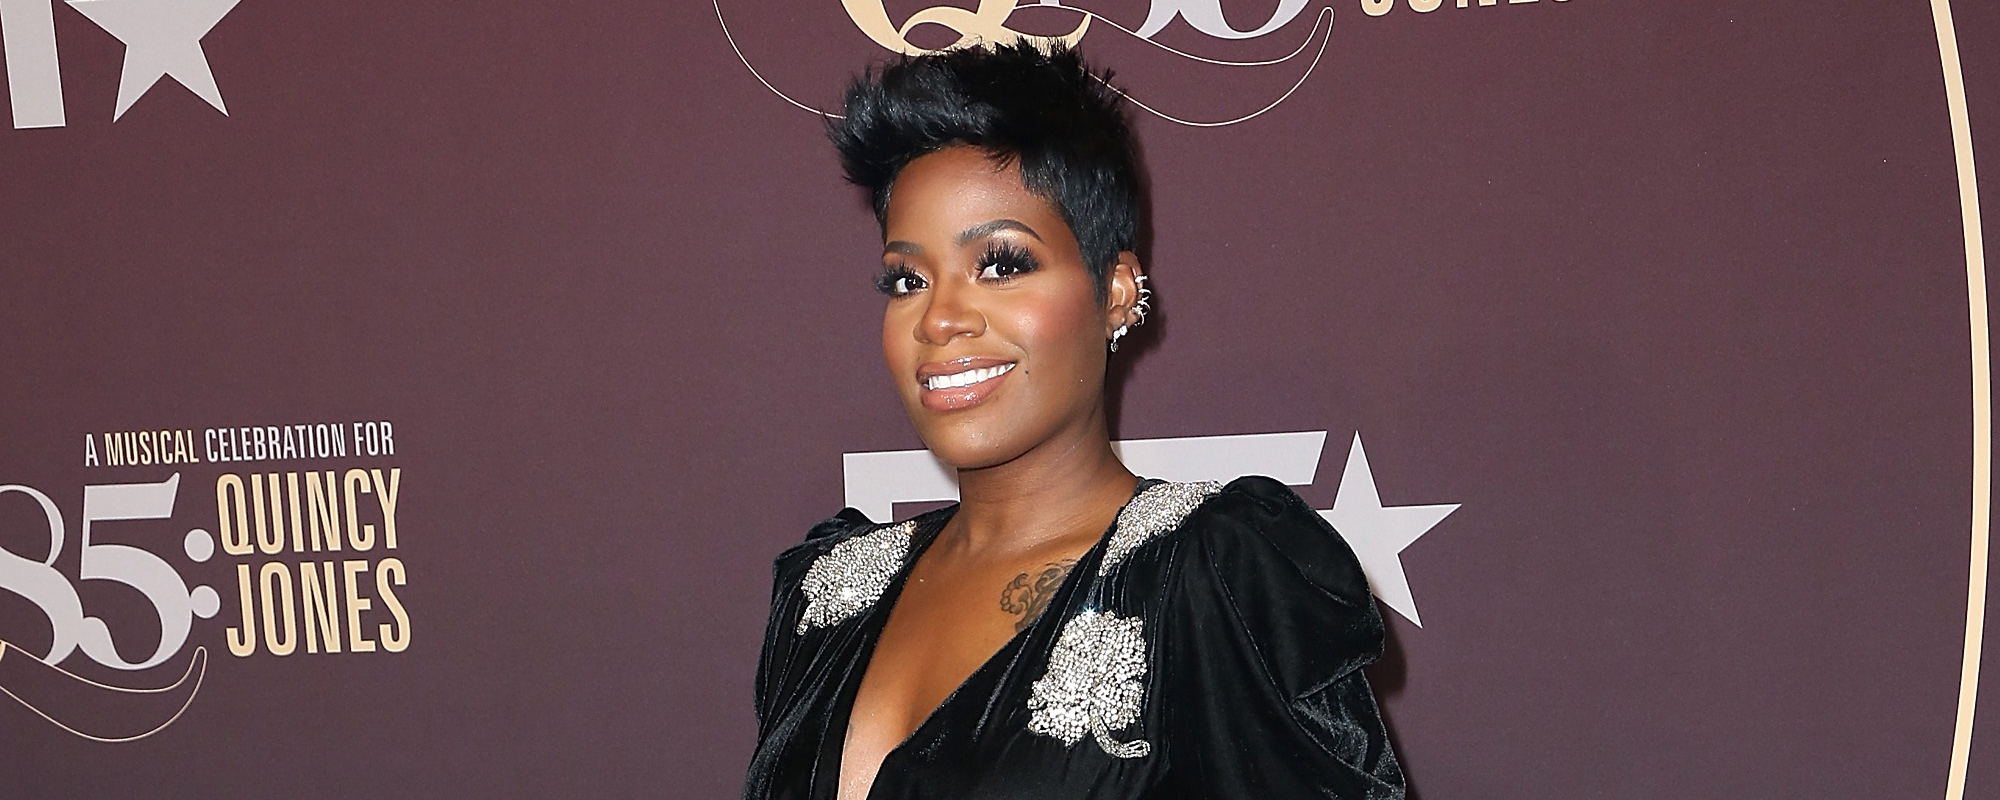 Fantasia Barrino Reveals Struggles and Hardships Following ‘American Idol’ Win: “I Lost Everything”